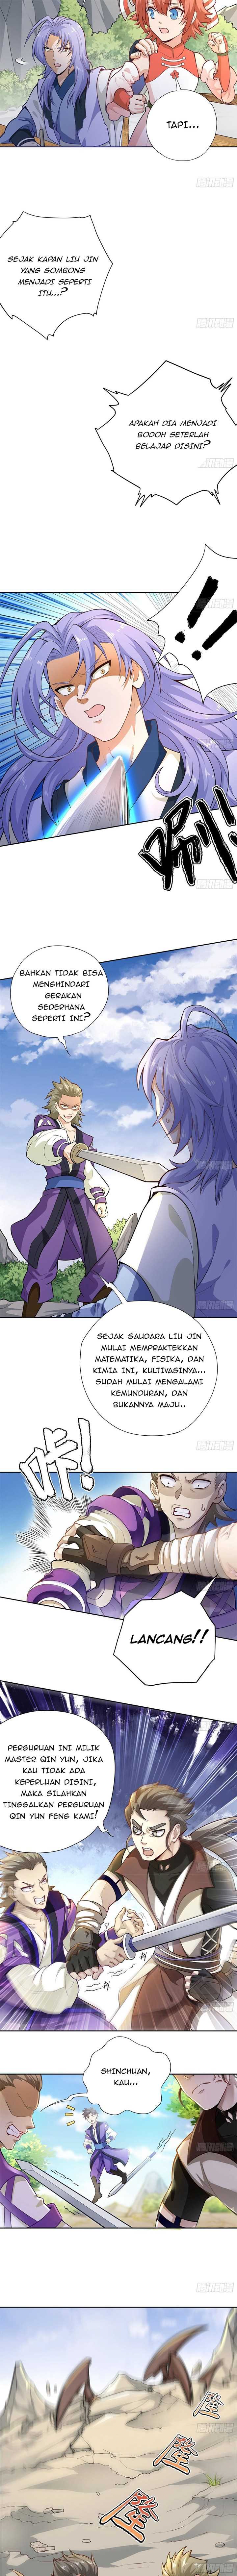 Cultivation Through Science Chapter 01